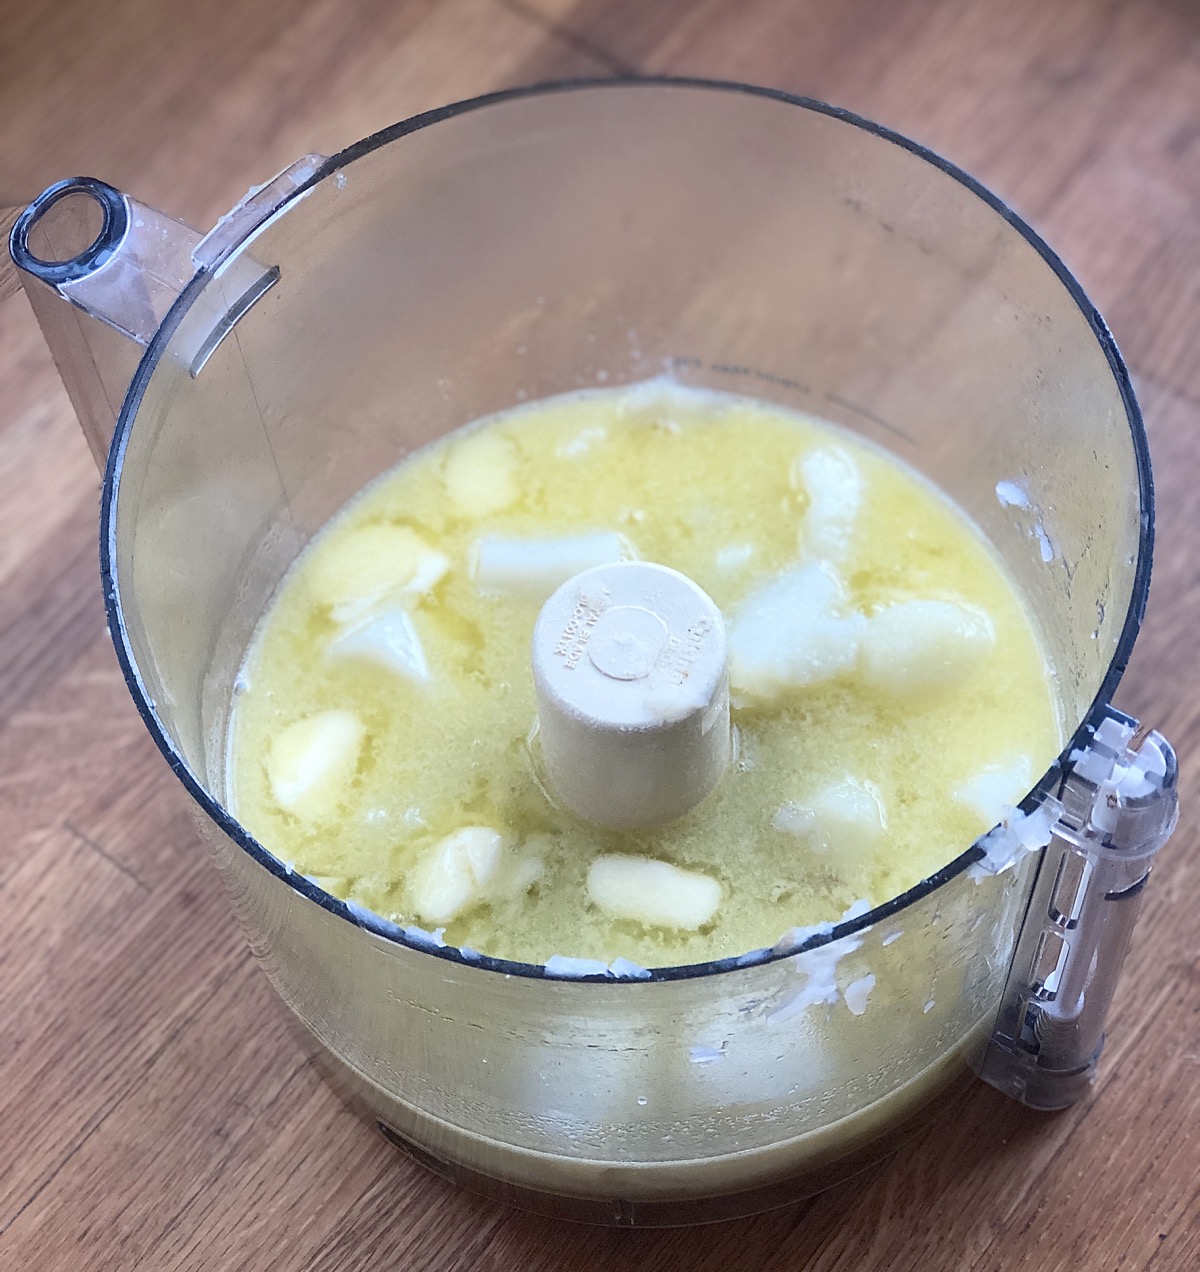 Potato chunks, hot water, butter, sugar, and salt in the bowl of a food processor.